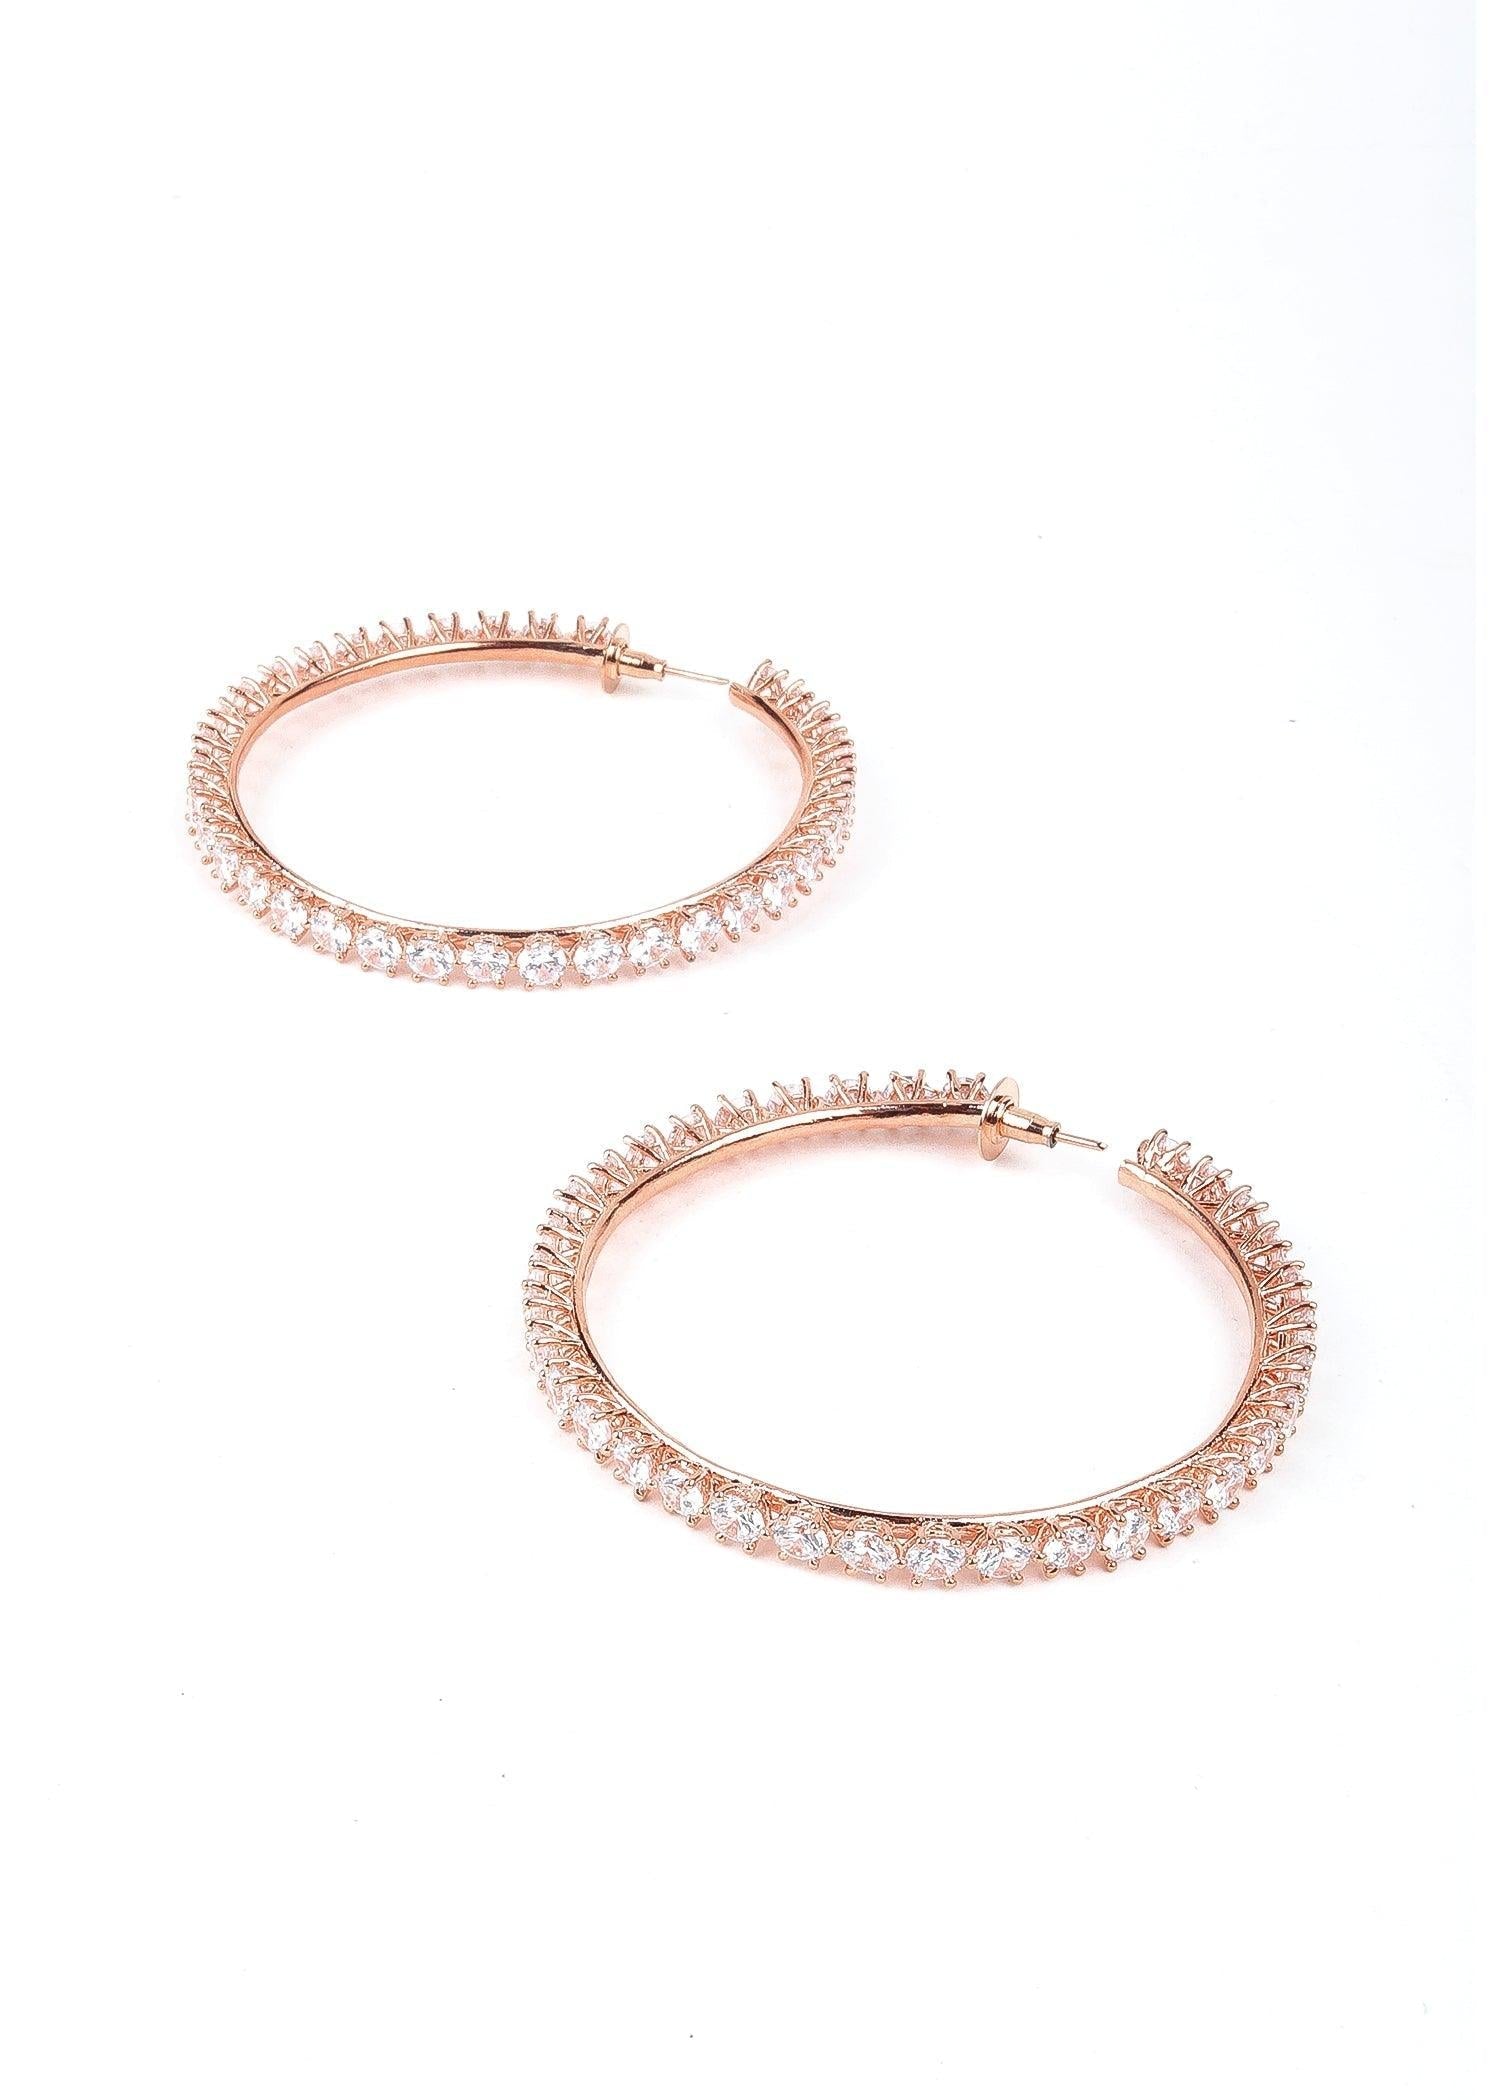 Women's Round Large Rose Gold Tone Hoops! - Odette